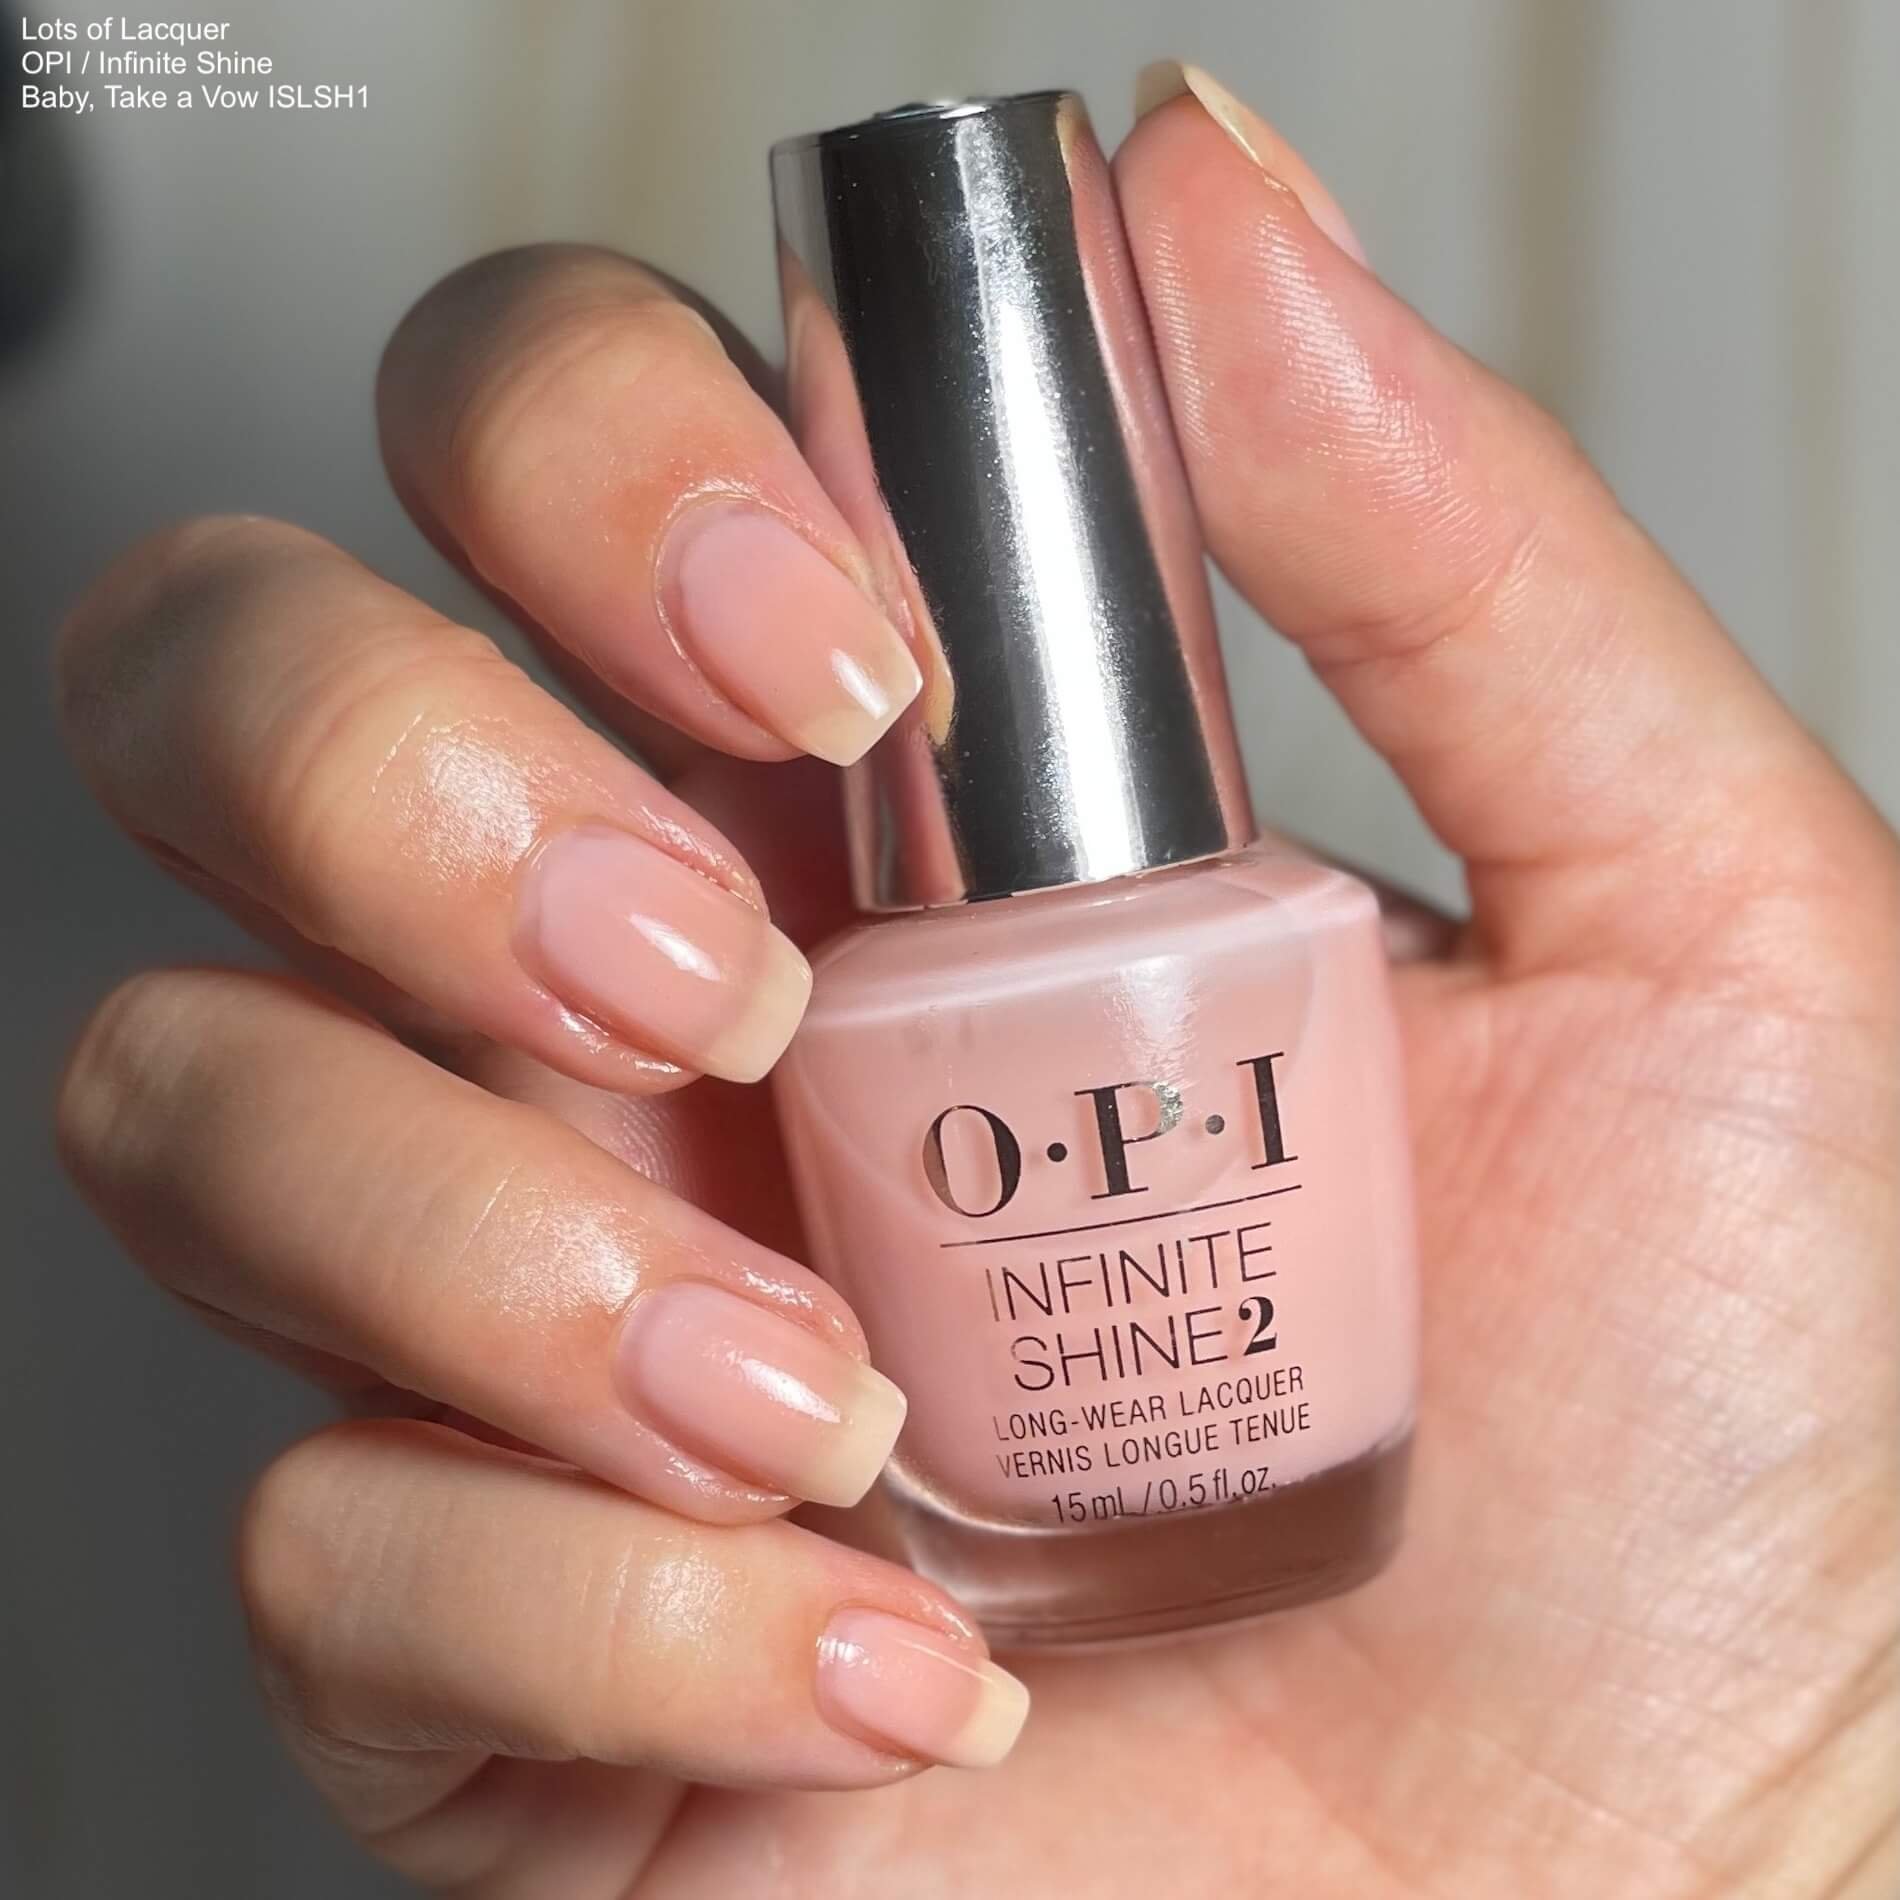 OPI Baby, Take a Vow Swatches + Review — Lots of Lacquer